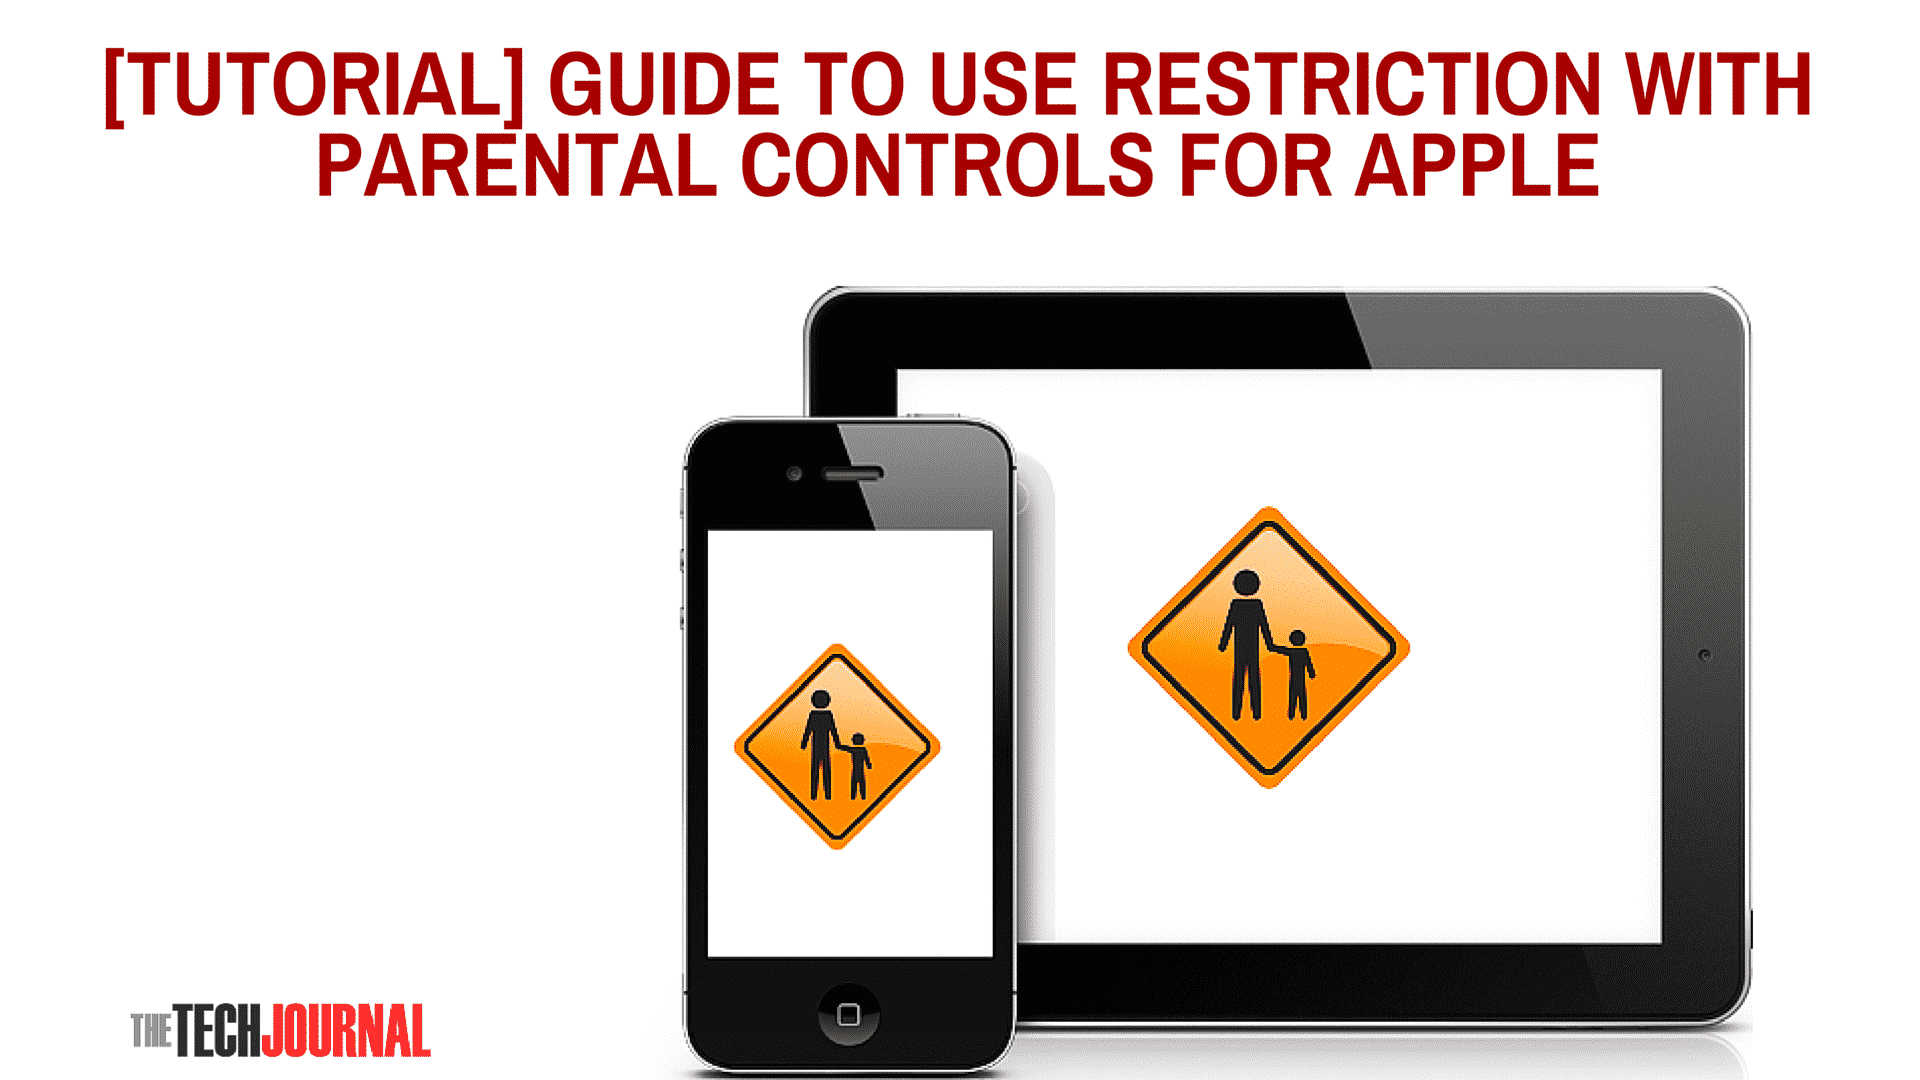 [Tutorial] Guide To Use Restriction With Parental Controls ... - 1920 x 1080 png 95kB